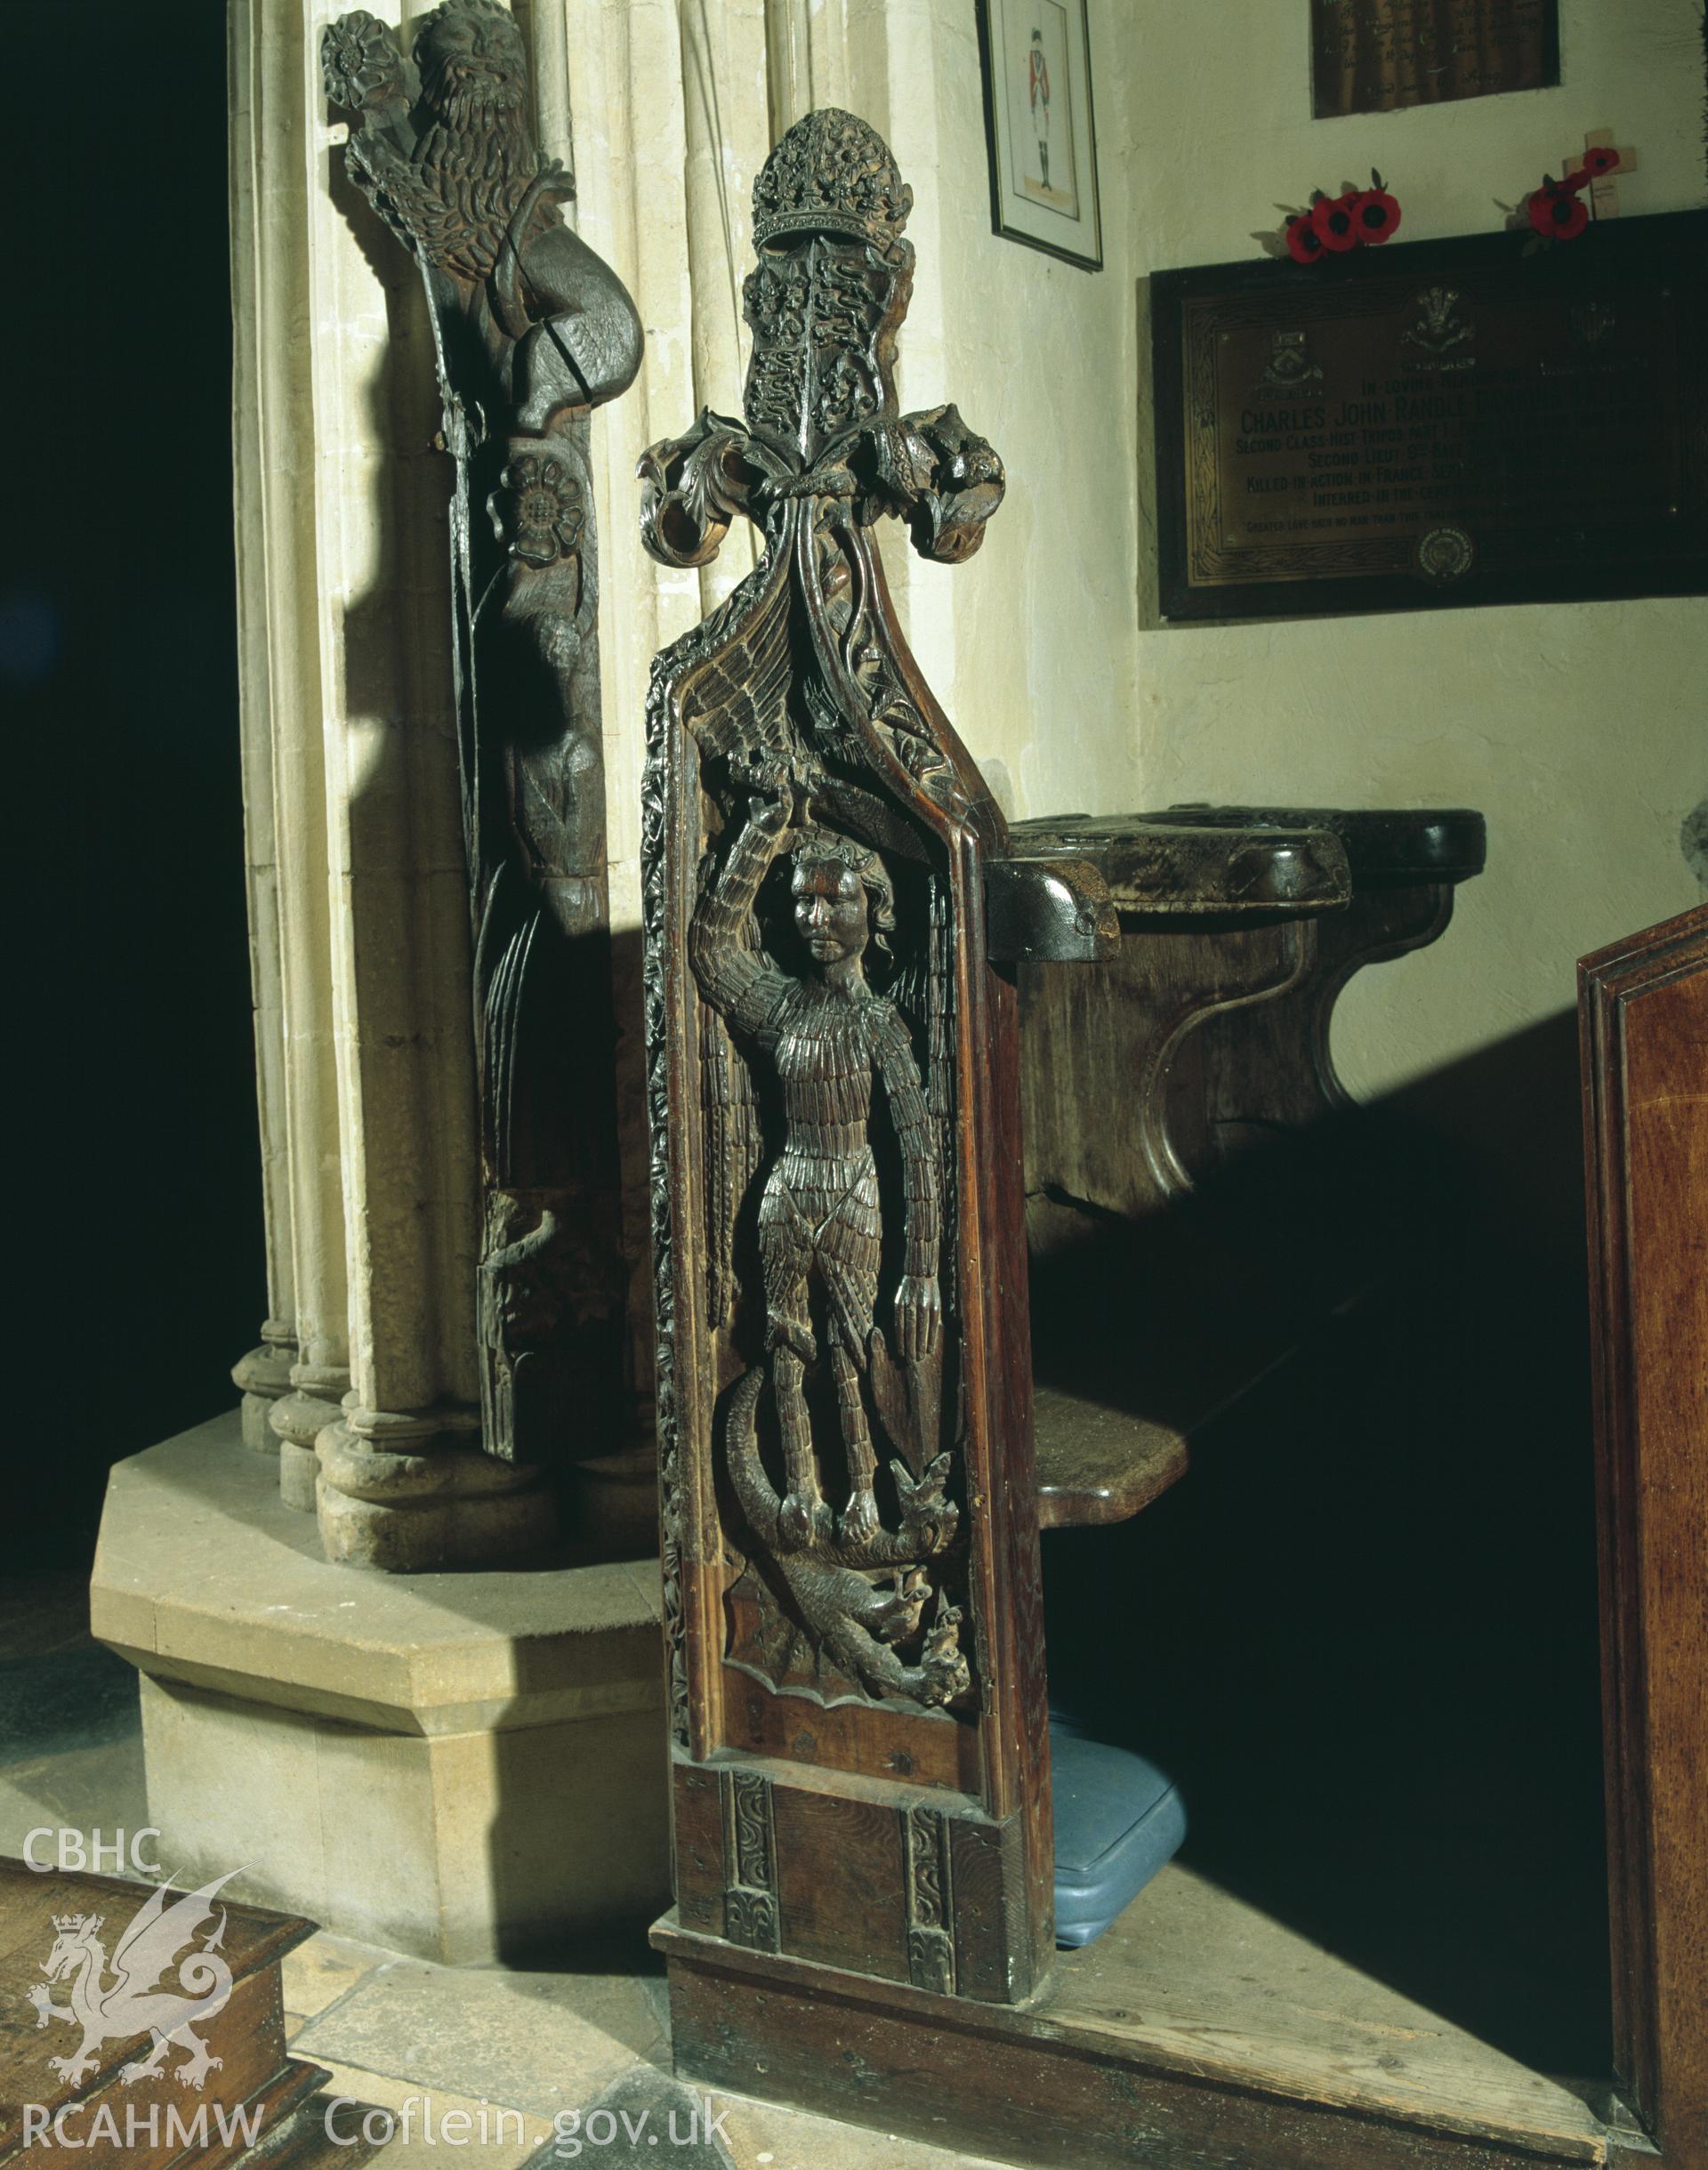 RCAHMW colour transparency showing view of wooden carving at St Mary's Church, Haverfordwest, taken by I.N. Wright, 2003.